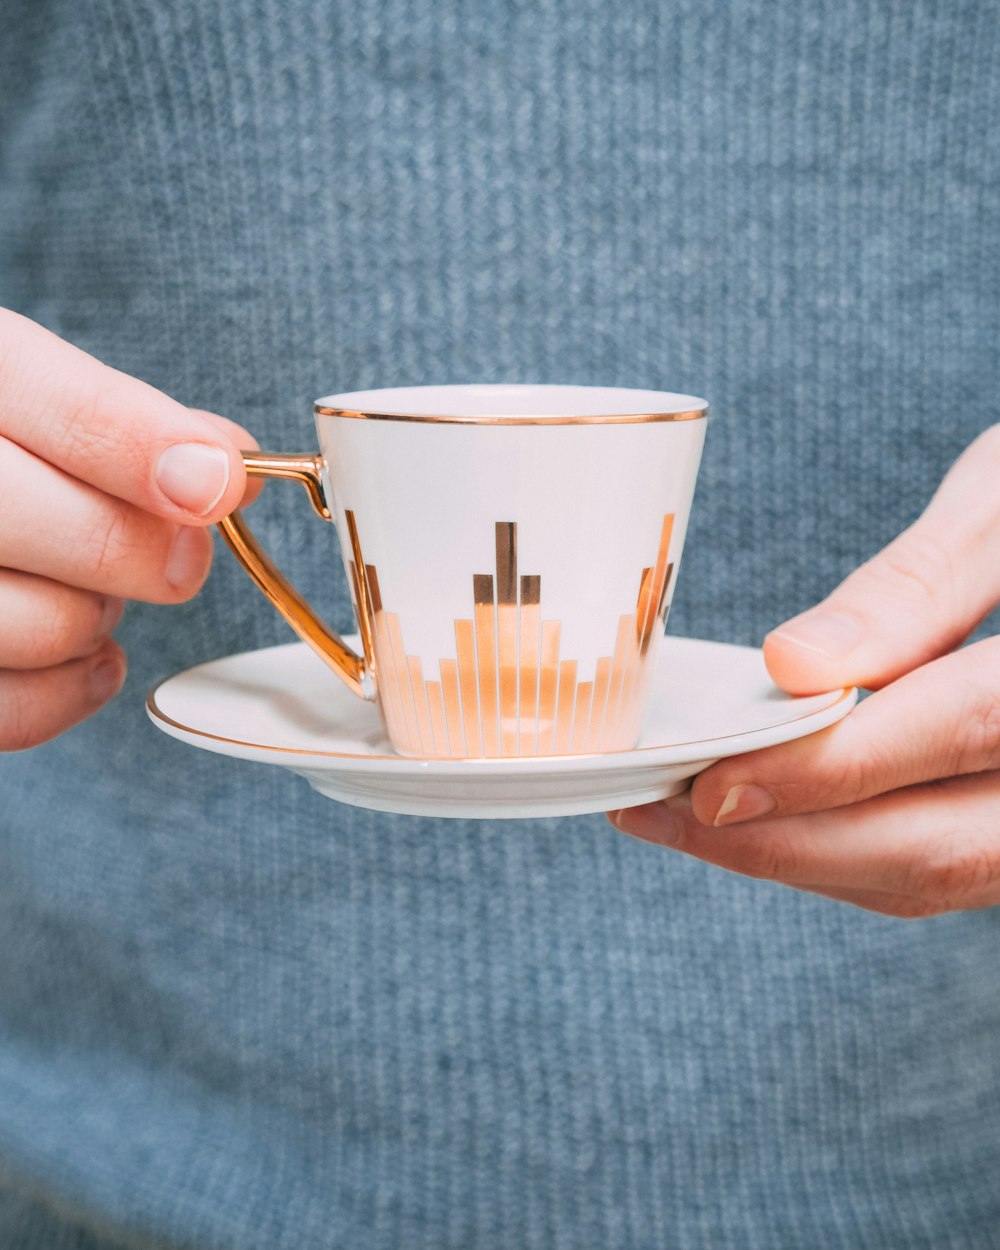 person holding white-and-gold ceramic teacup with saucer